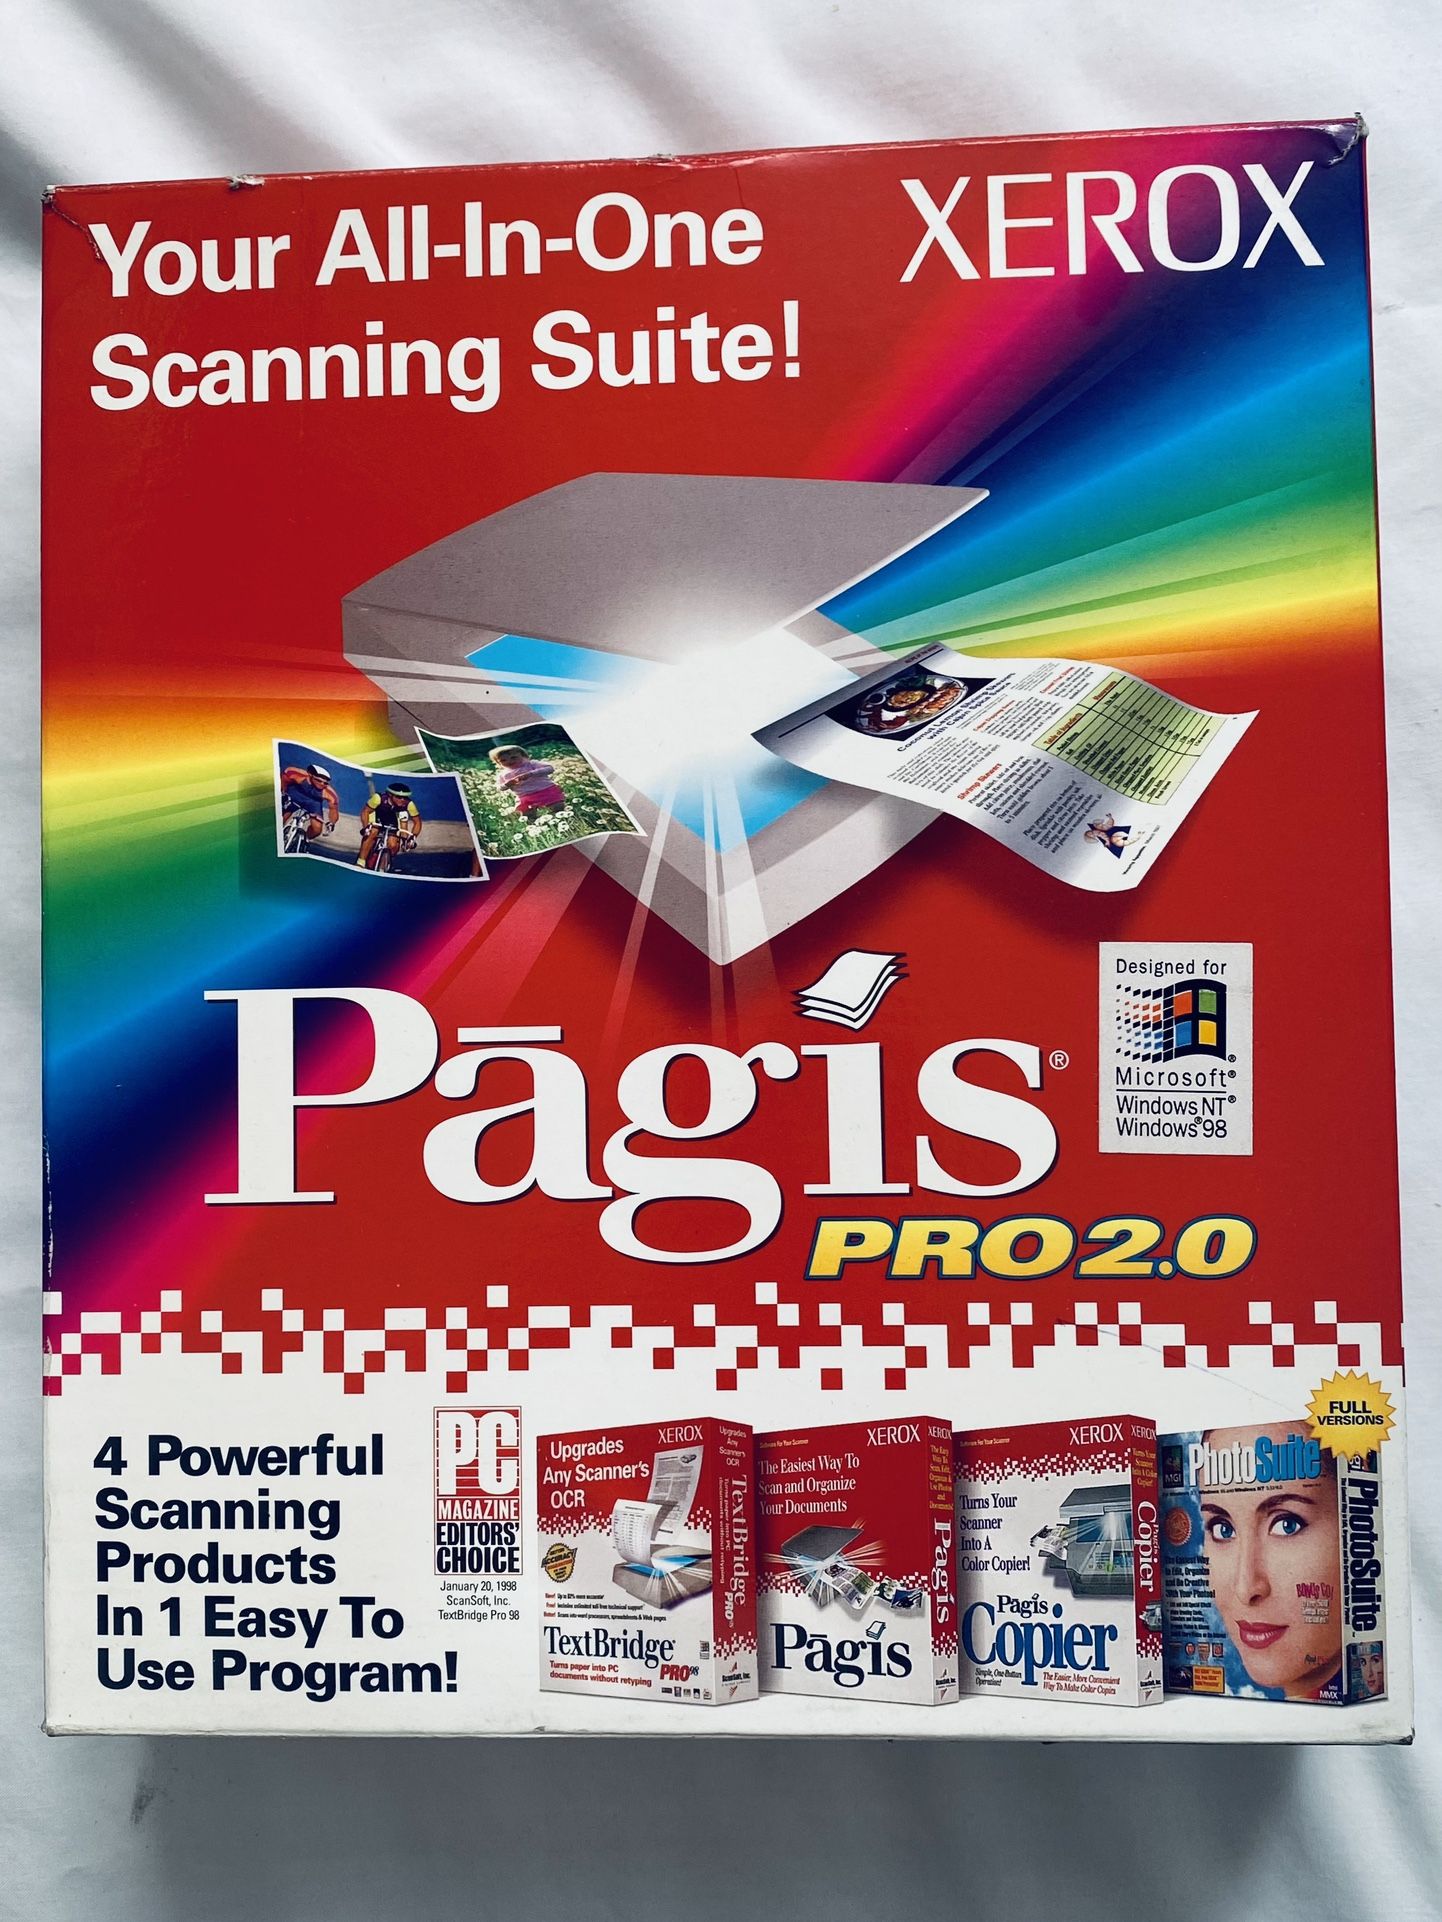 XEROX Pages 2.0 All-In-One Scanning Suite